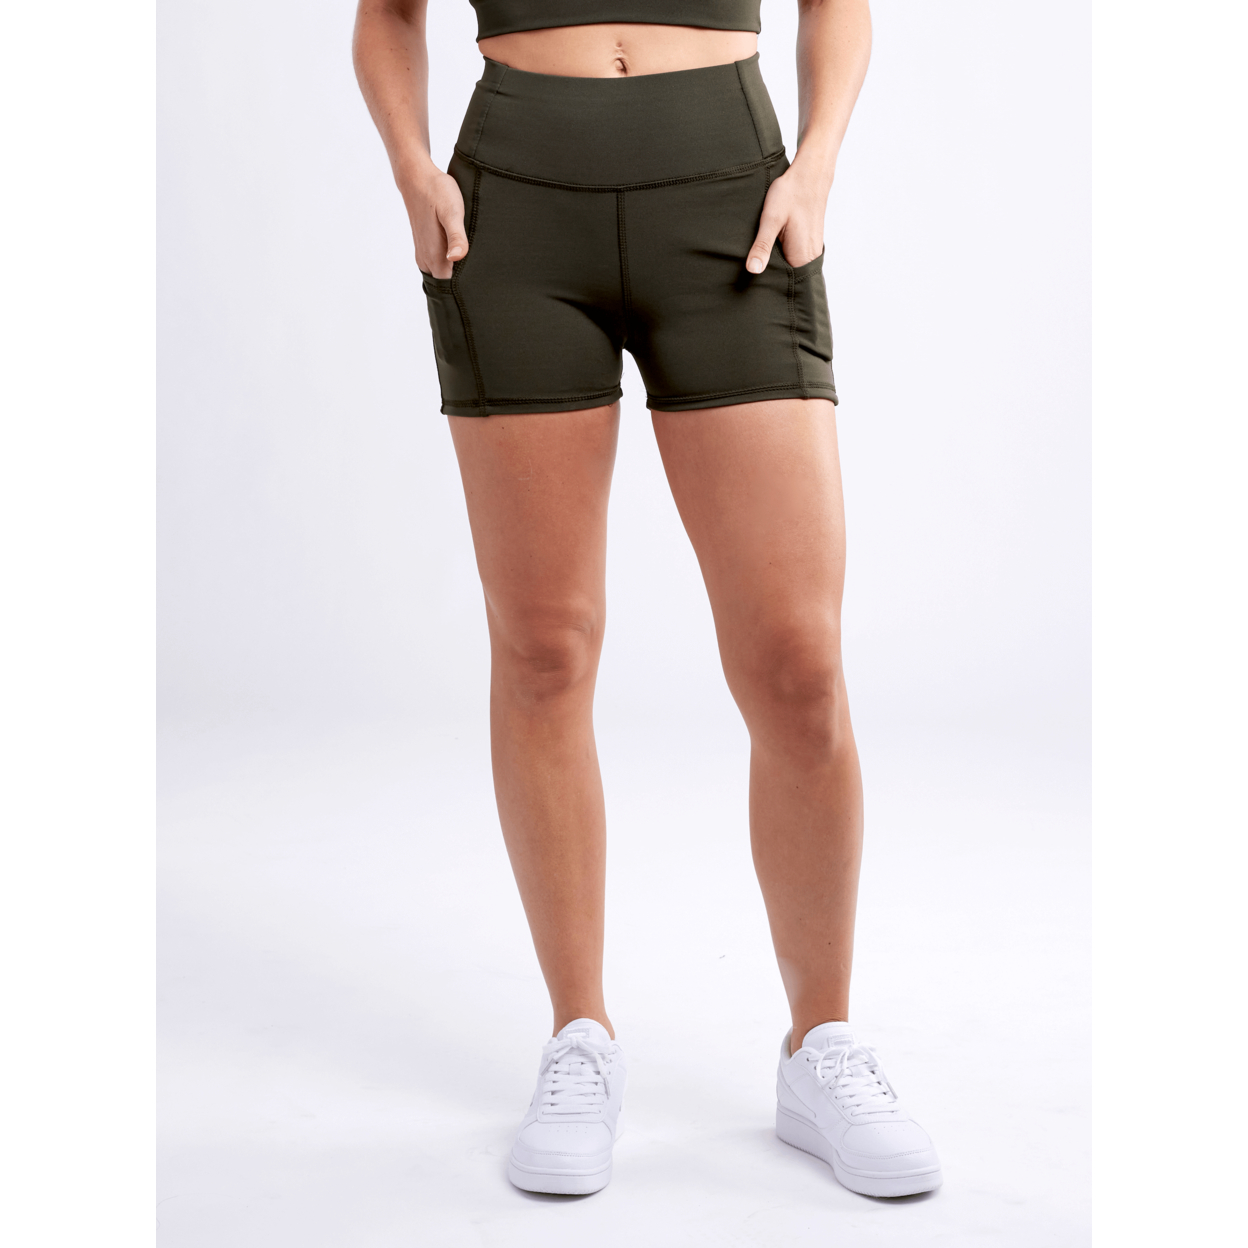 High-Waisted Athletic Shorts With Side Pockets - Olive Green, Small / Medium